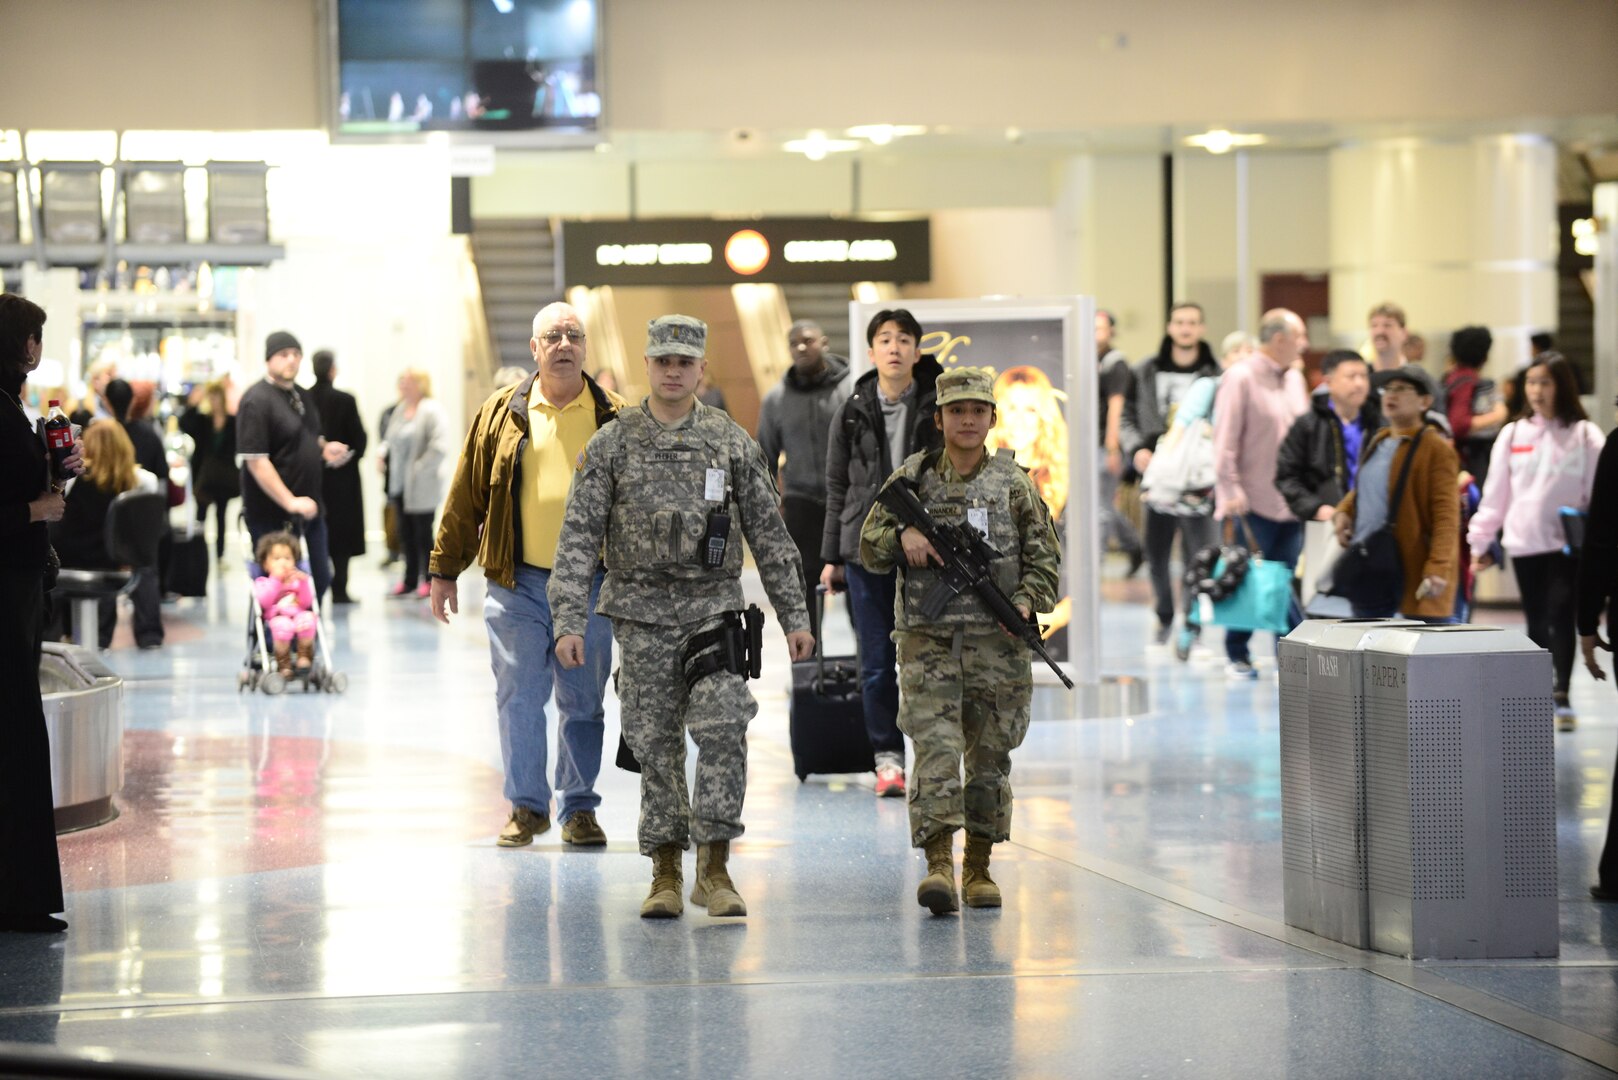 Two Nevada National Guard Soldiers conduct a foot patrol through the McCarran International Airport baggage claim in Las Vegas, Nevada.